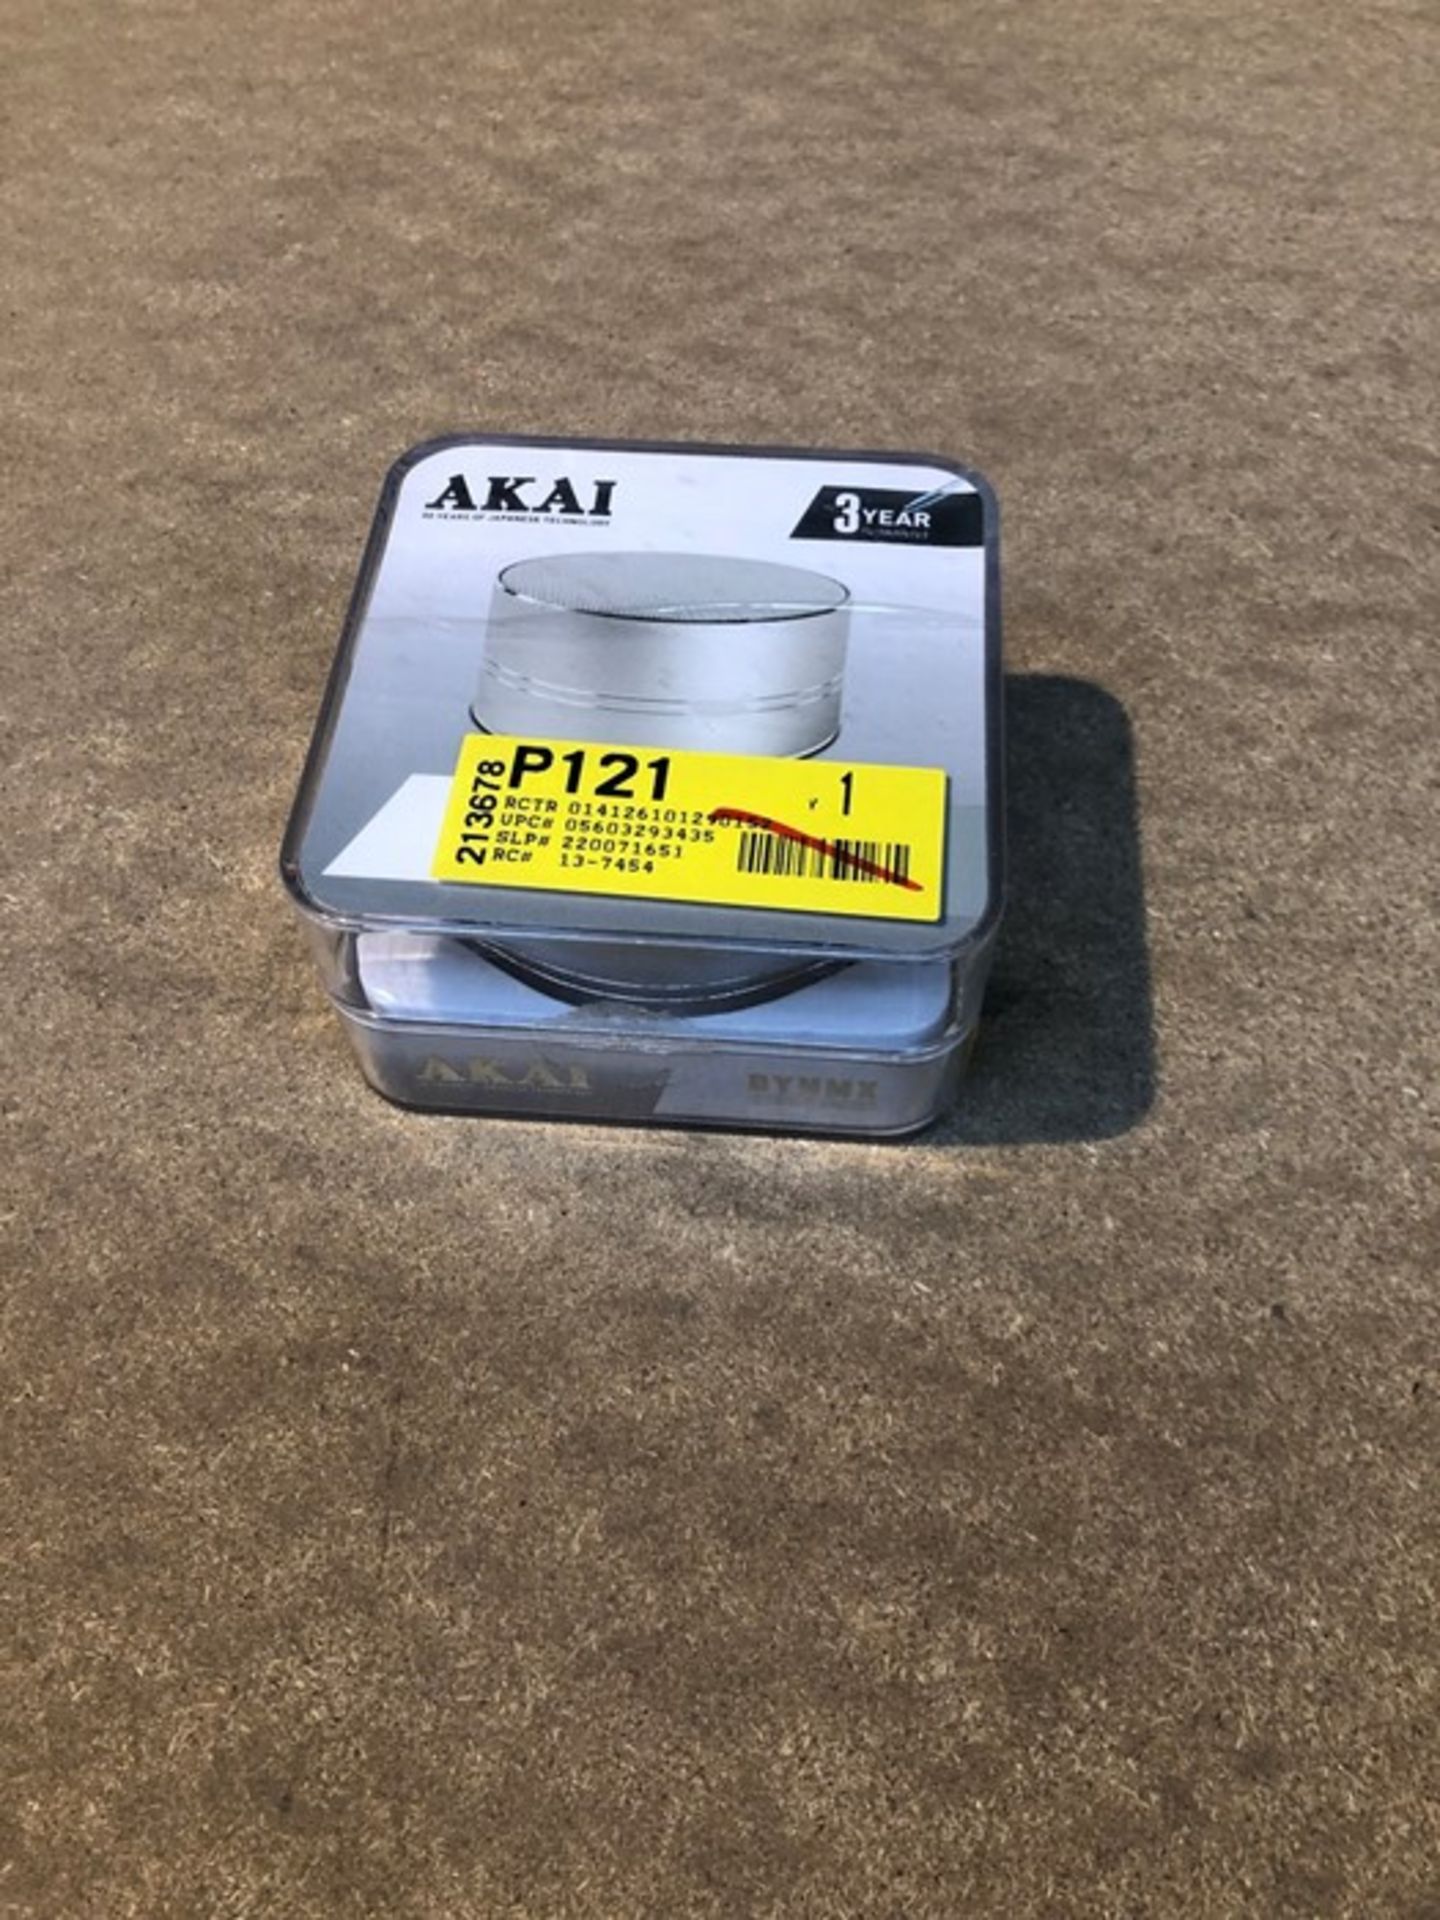 1 BOXED AKAI DYNMX ALUMINIUM CYLINDER BLUETOOTH SPEAKER IN SILVER / RRP £19.99 - BL -3678 (VIEWING